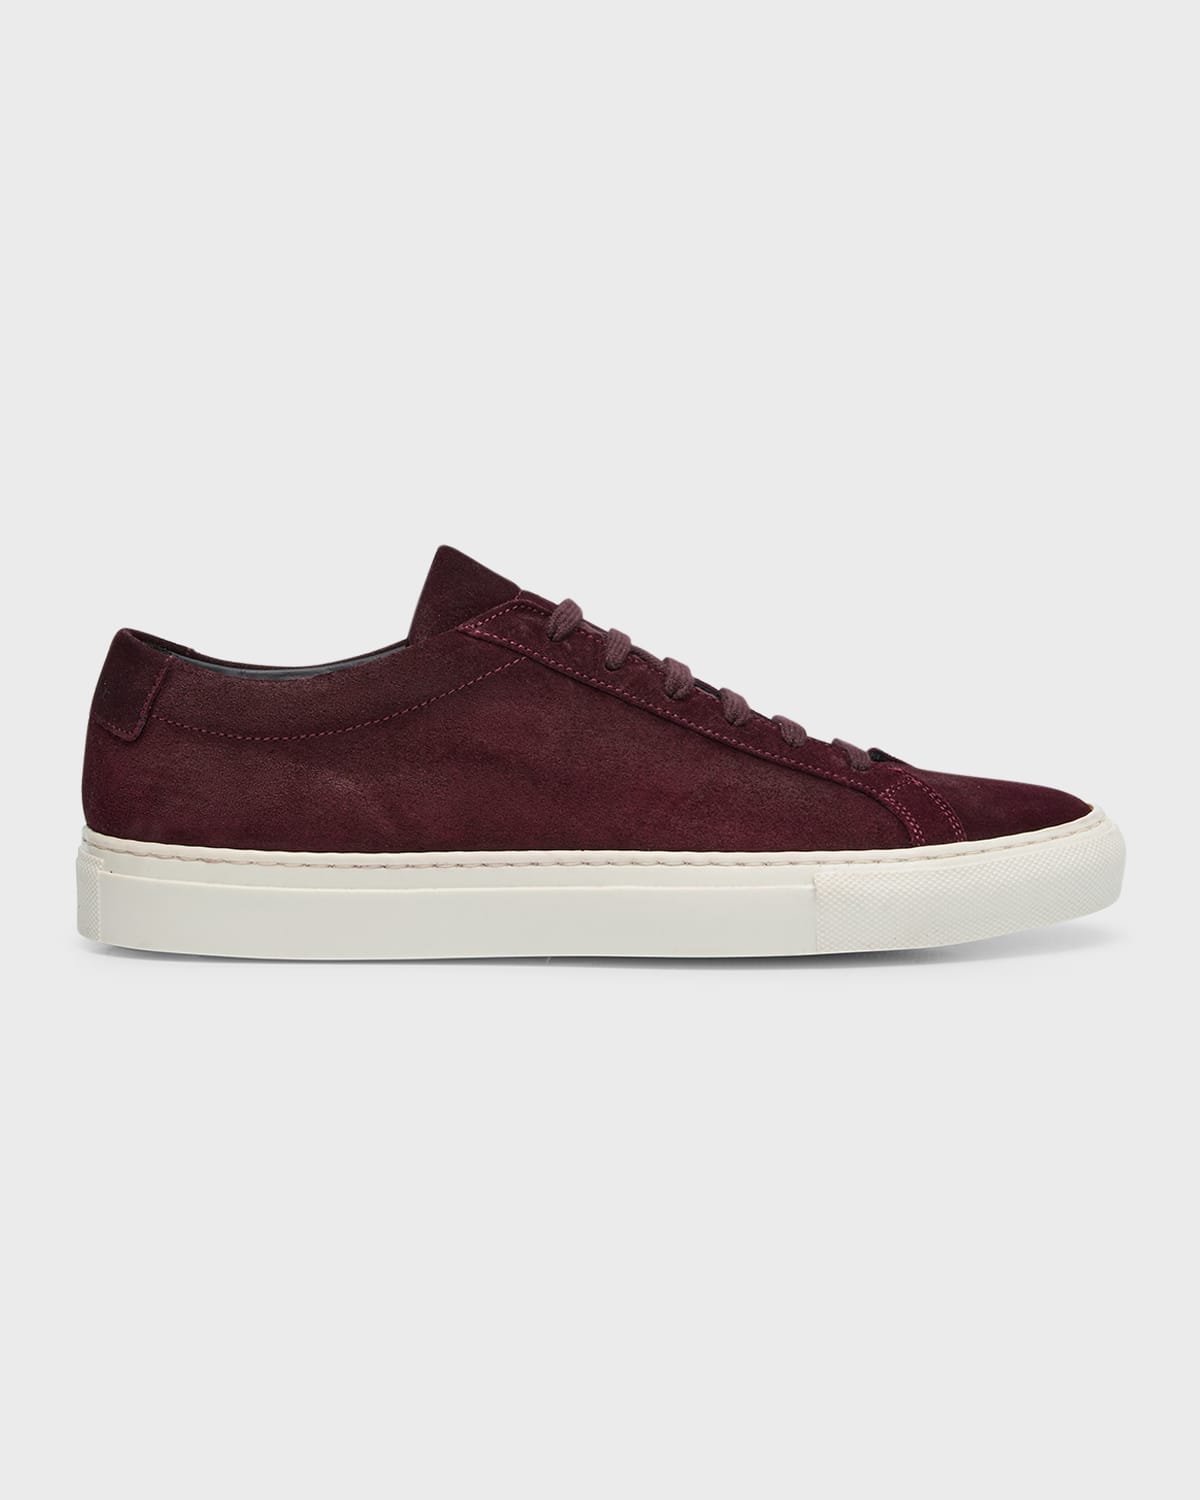 Common Projects Men's Achilles Waxed Suede Low Top Sneakers In Tobacco